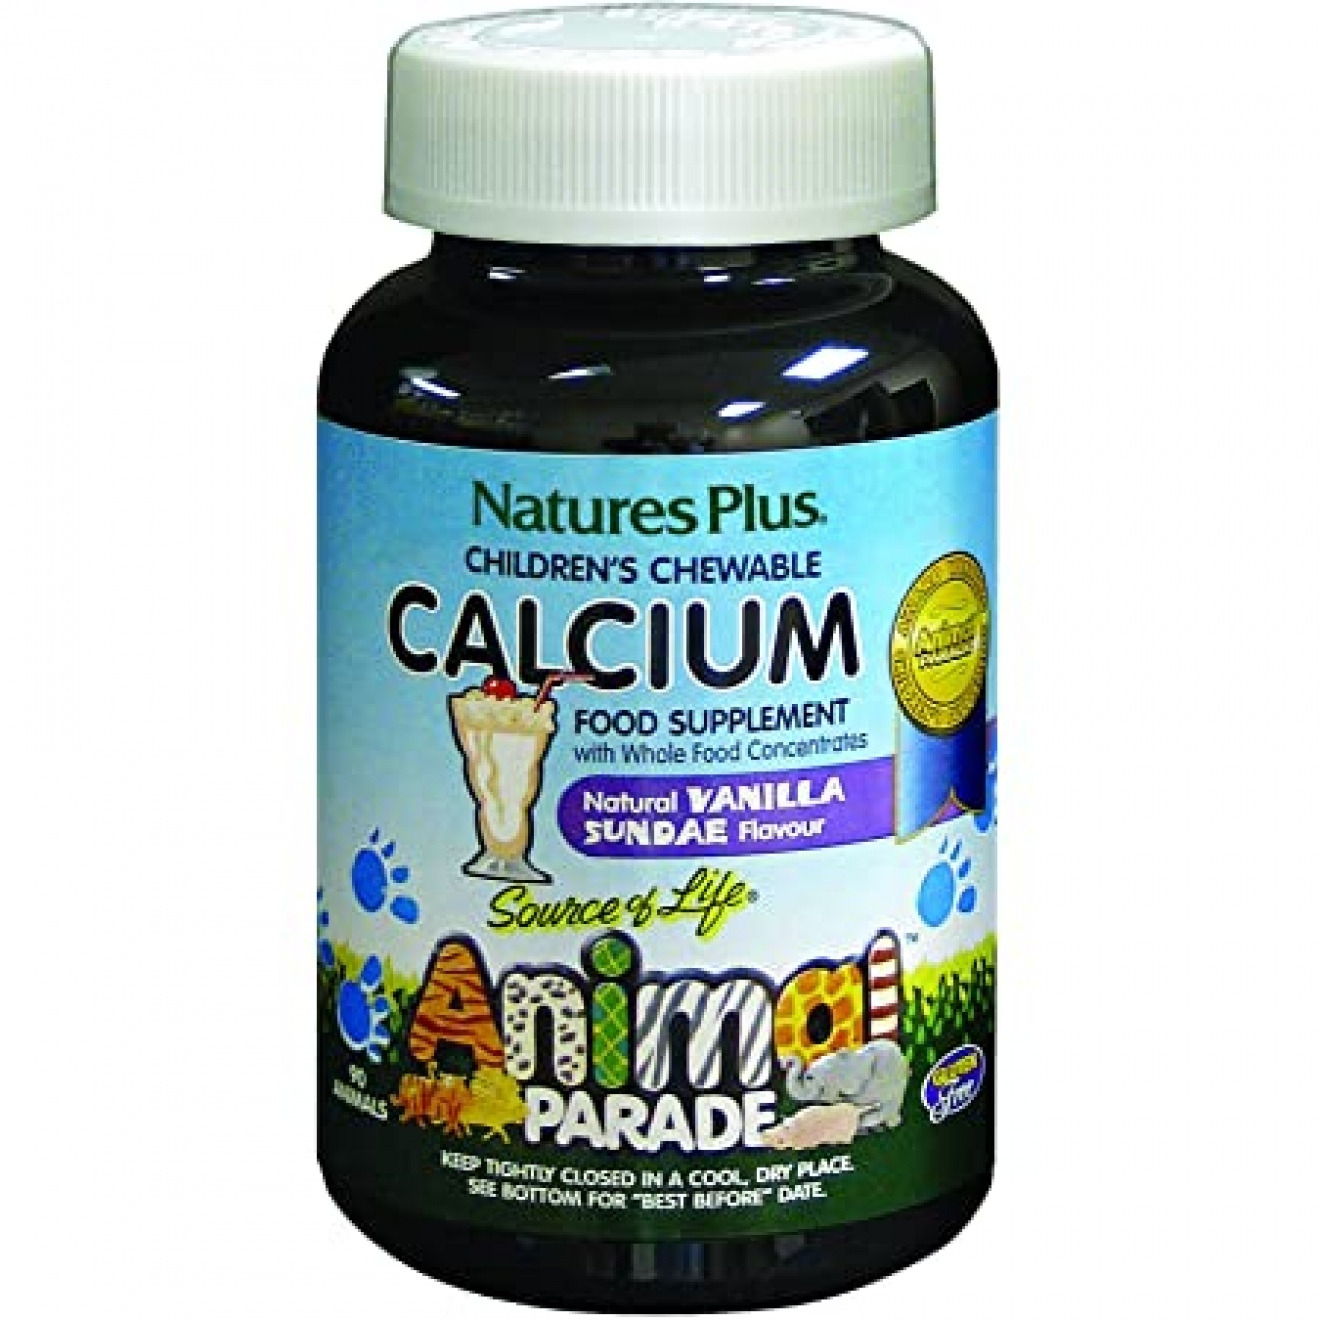 Natures Plus, Source of Life, Animal Parade, Calcium, Children’s Chewable Supplement, Natural Vanilla Sundae Flavor, 90 Animal-Shaped Tablets